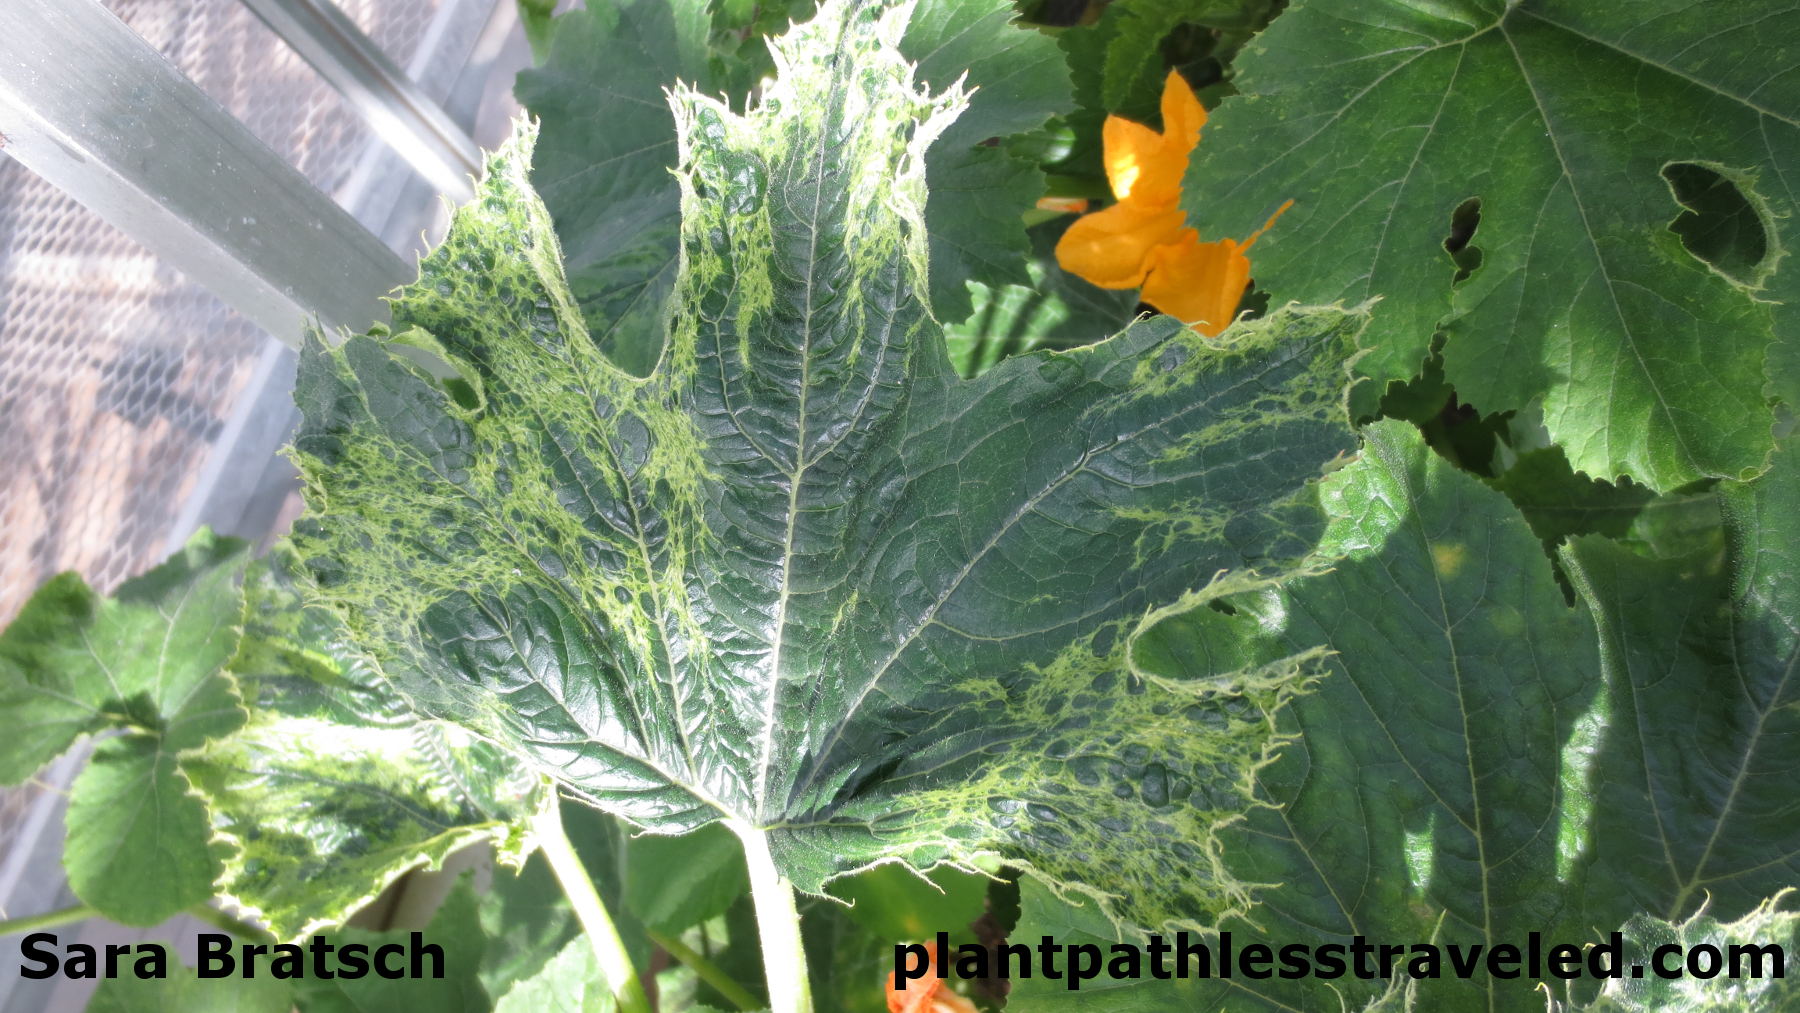 Zucchini infected with SqMV showing symptoms of deformation and chlorotic mottling.